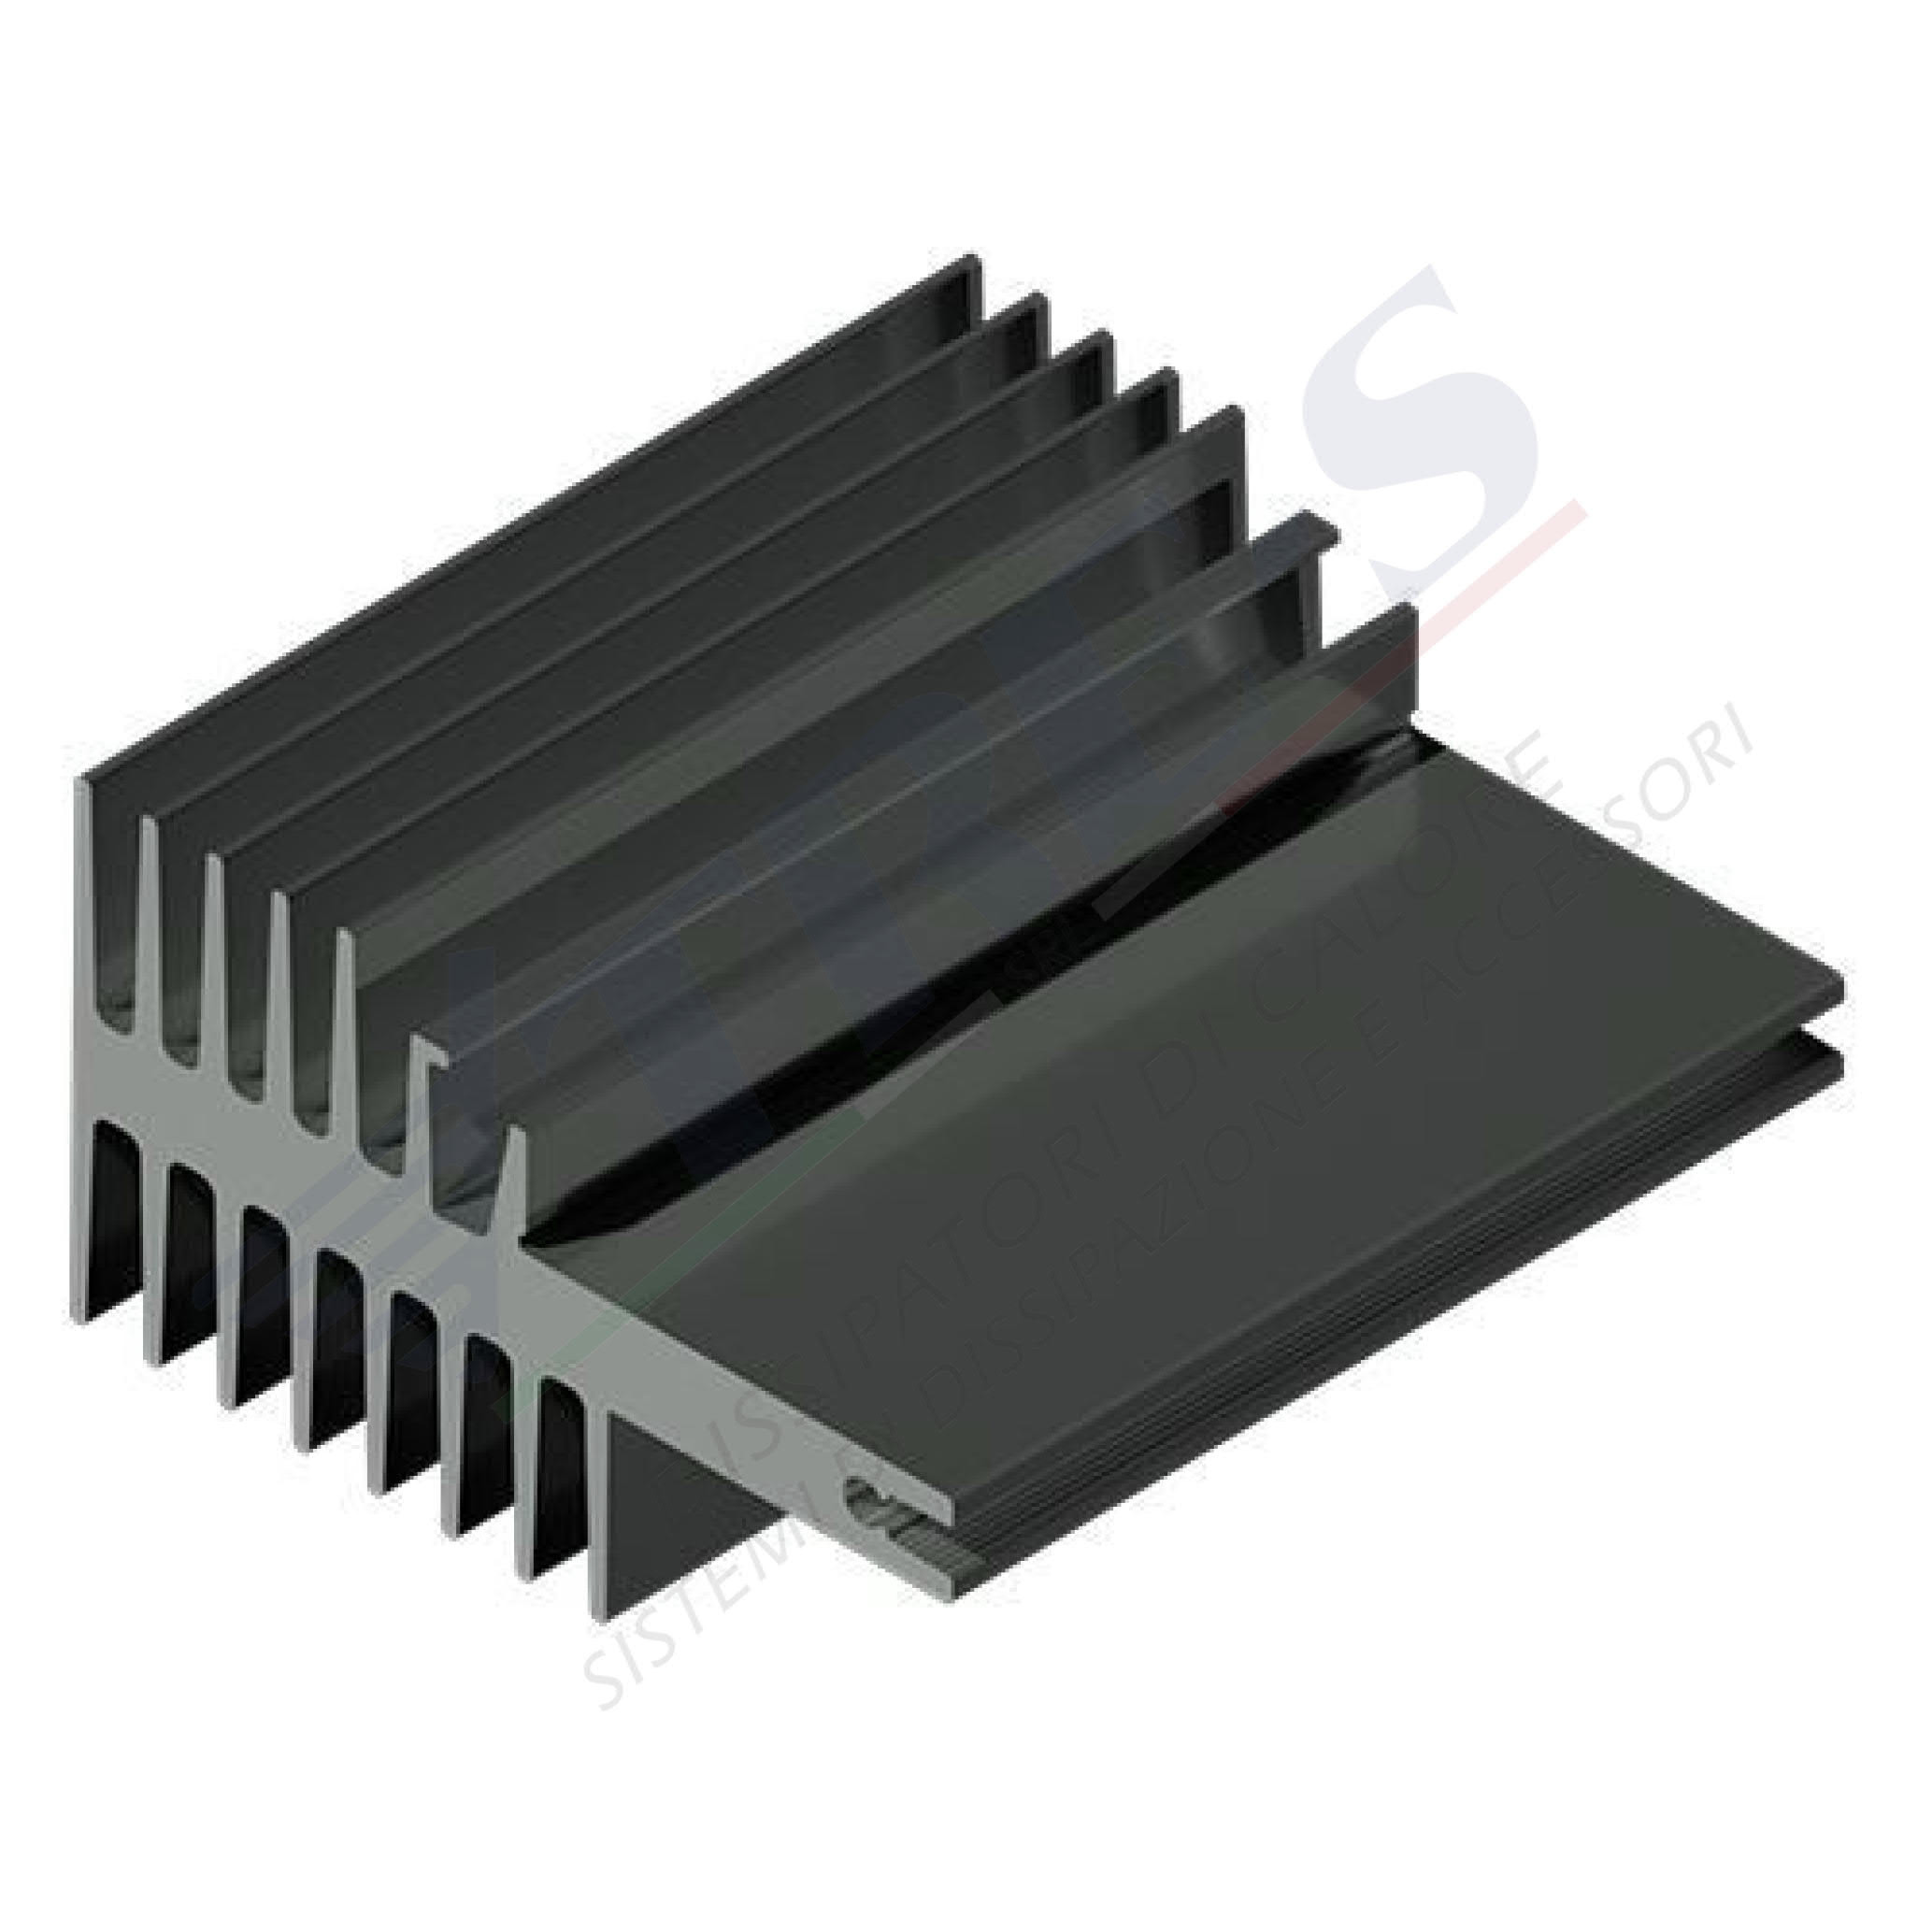 PRO1291 - Heat sinks with clip system